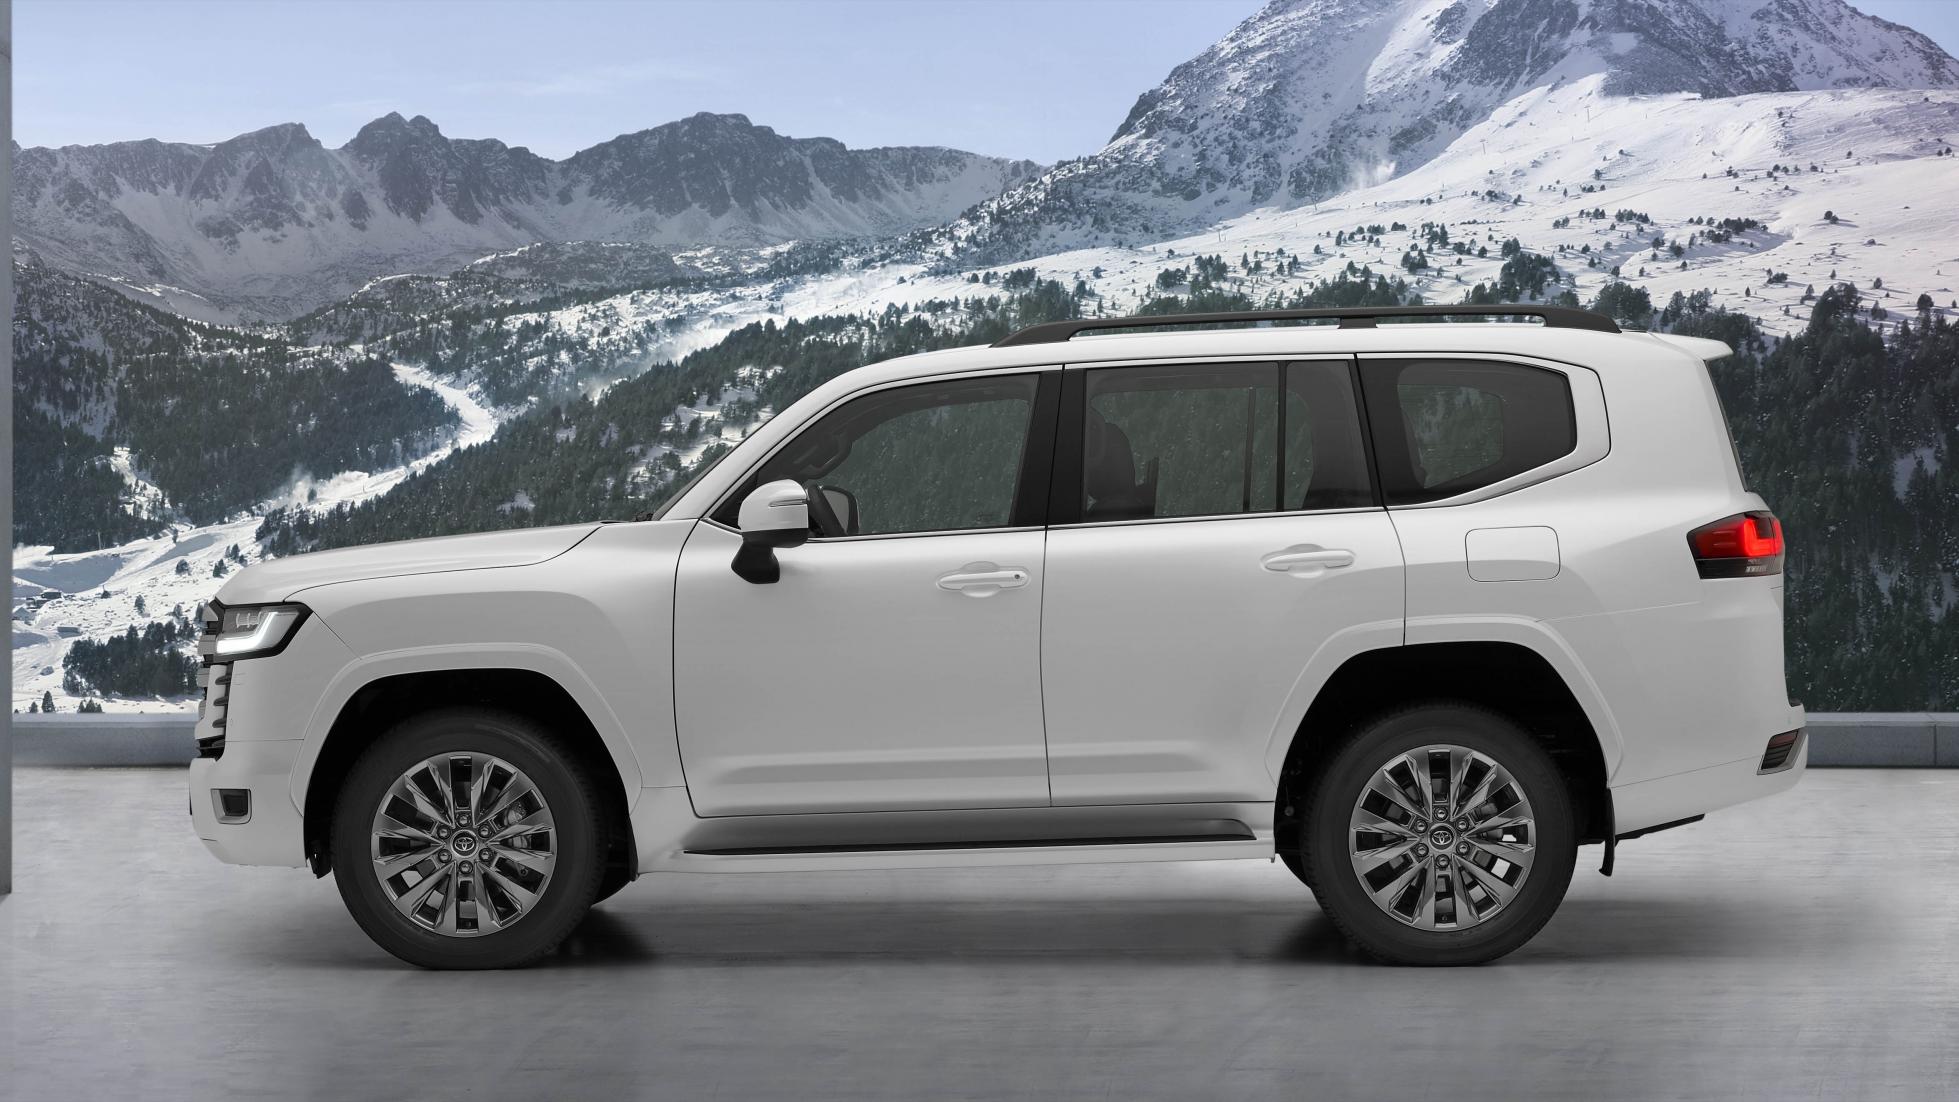 2022 Toyota Land Cruiser 300 Global launch, Specs, Features